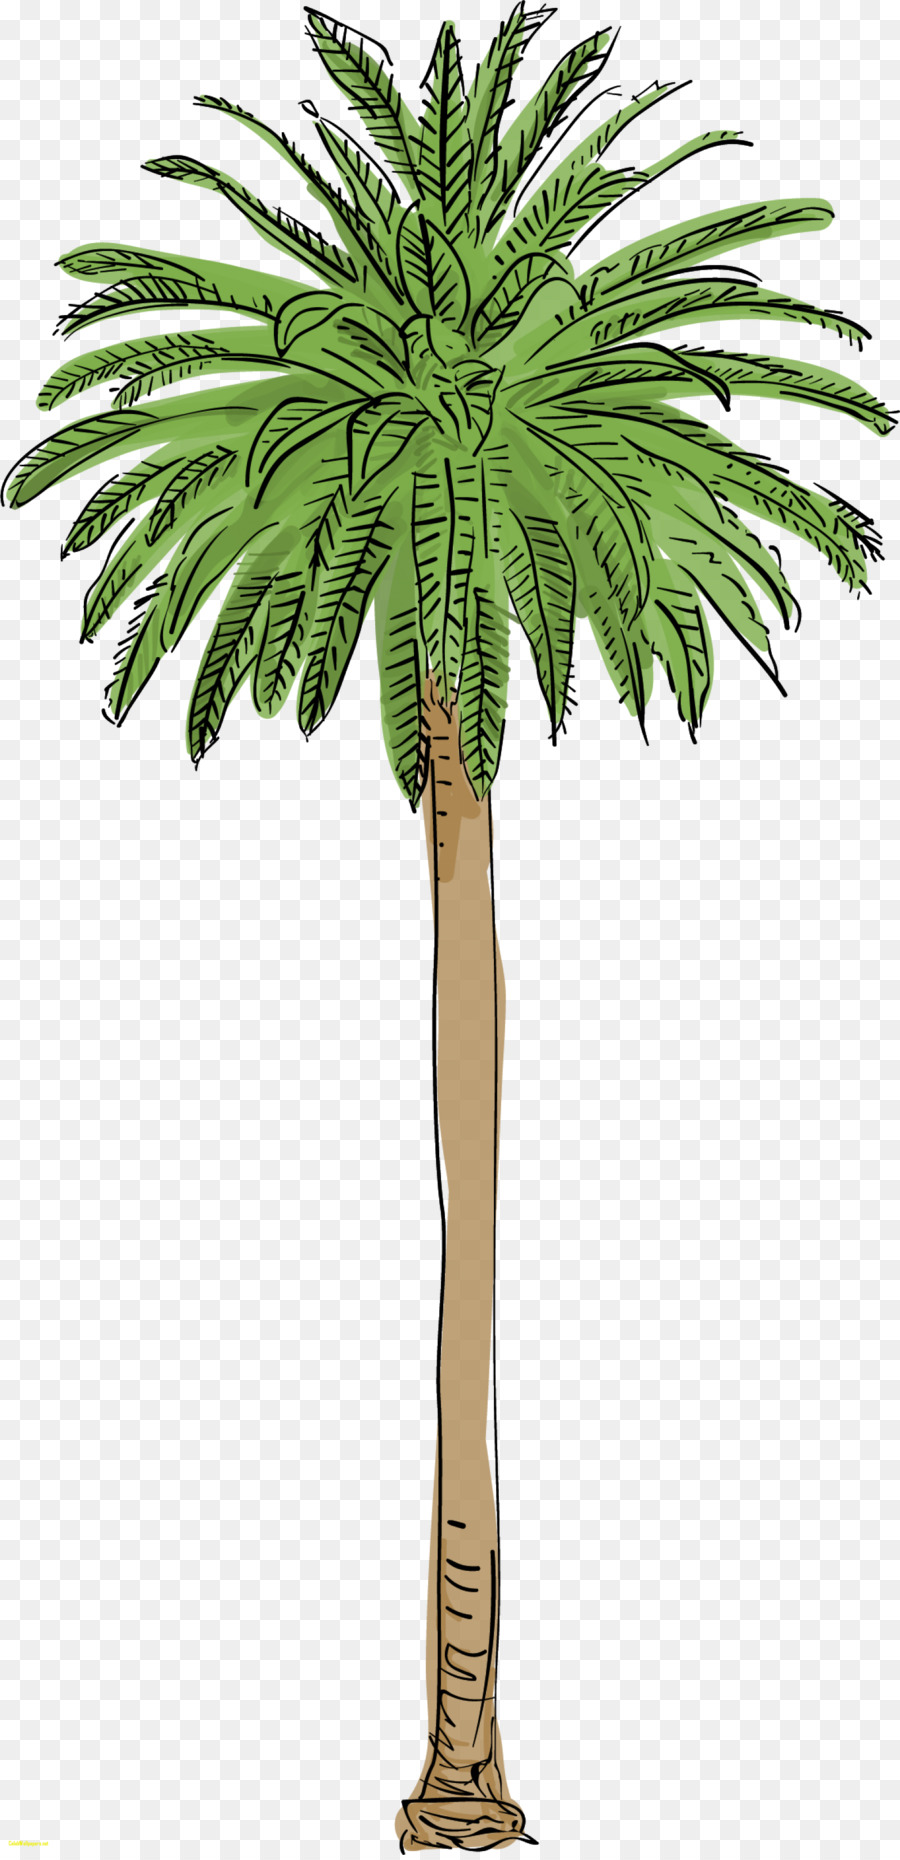 Arecaceae Tree Canary Island date palm Mexican fan palm - tree png download - 1600*3297 - Free Transparent Arecaceae png Download.